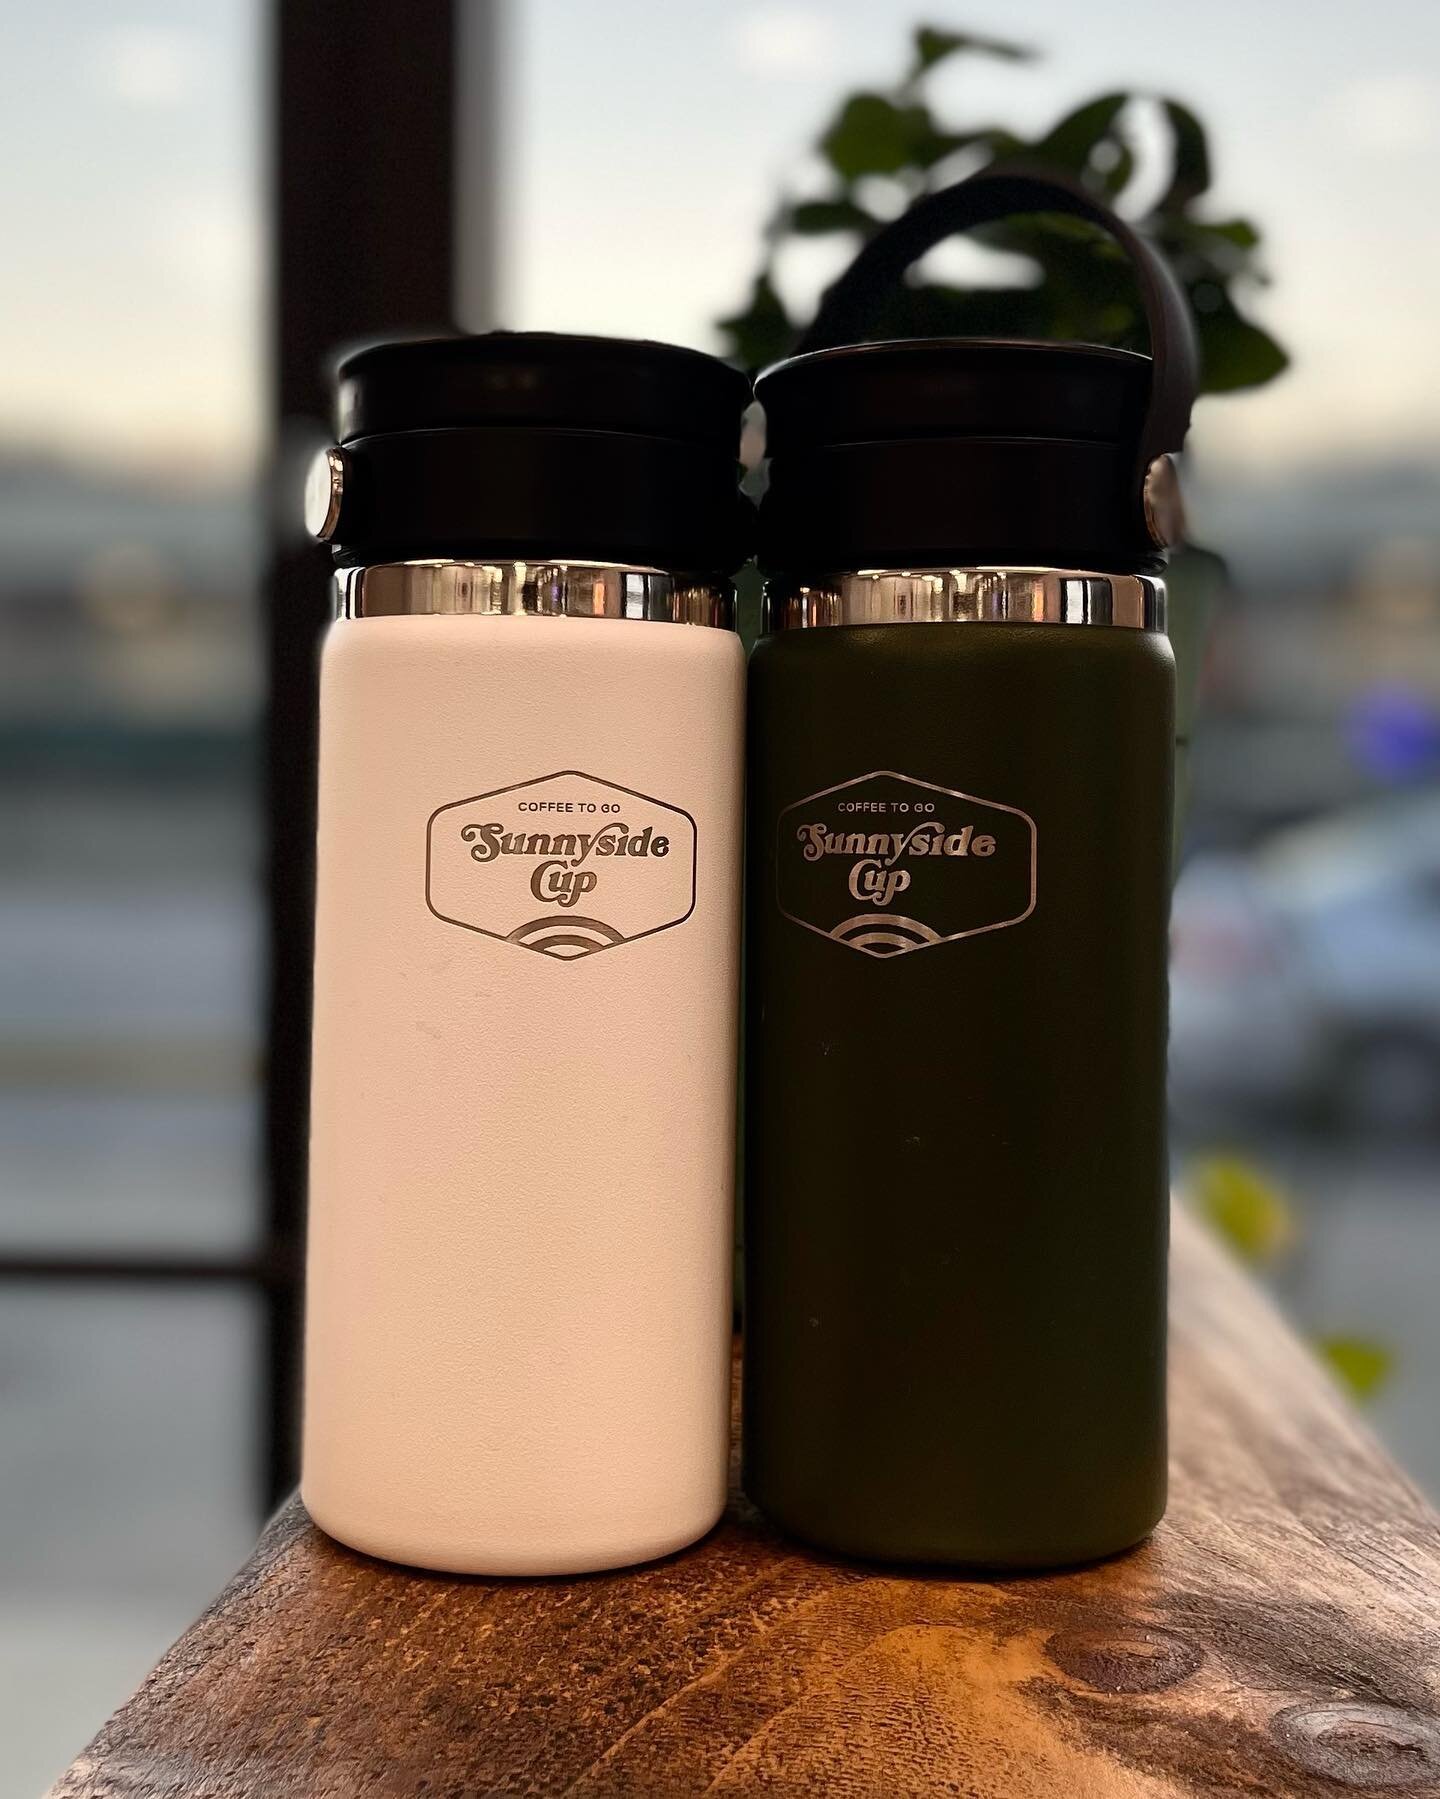 #sunnysidehydroflasks  they are $35+tax . Come see us at 12-2pm for our happy hour, drinks are half off! #shoplocal #coffee #keeponthesunnyside #chattanooga